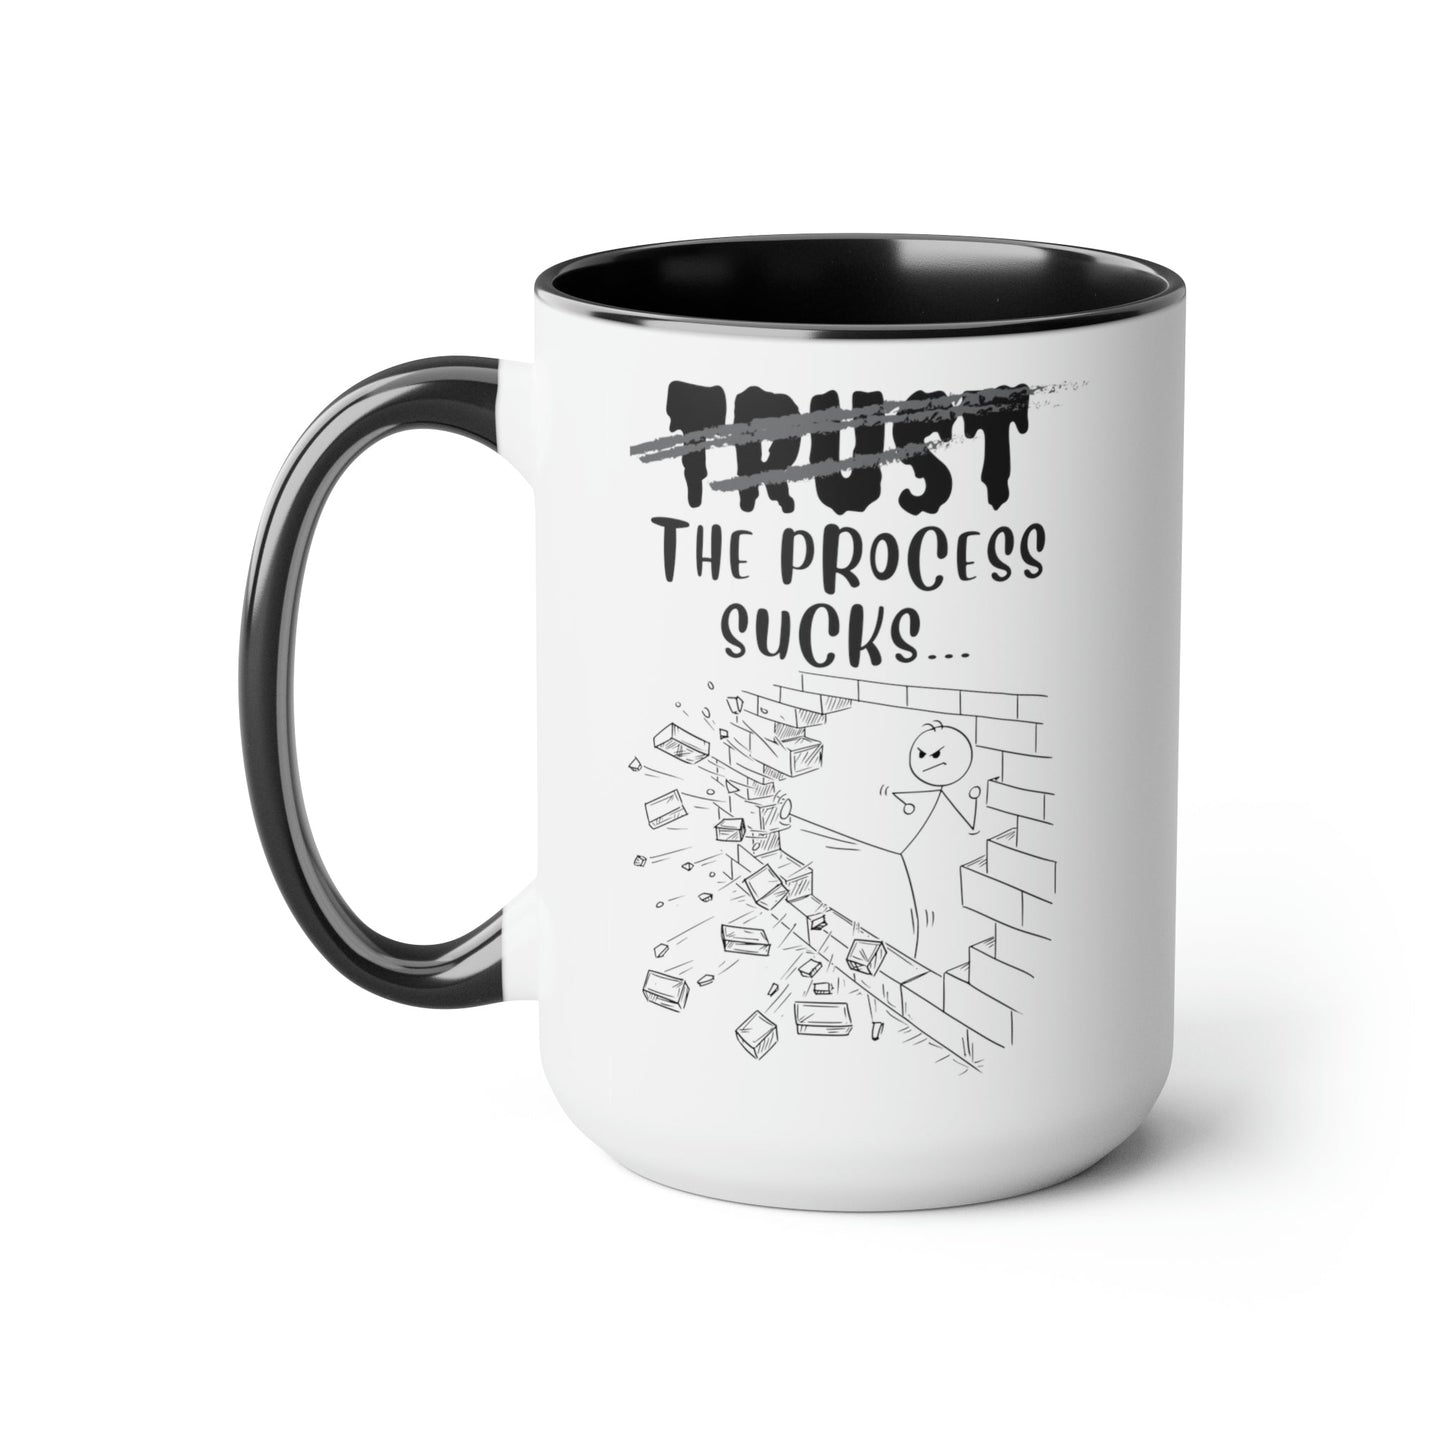 Accent Mugs, Sassy and Funny, Inspirational, Available in Two Colors, 15oz